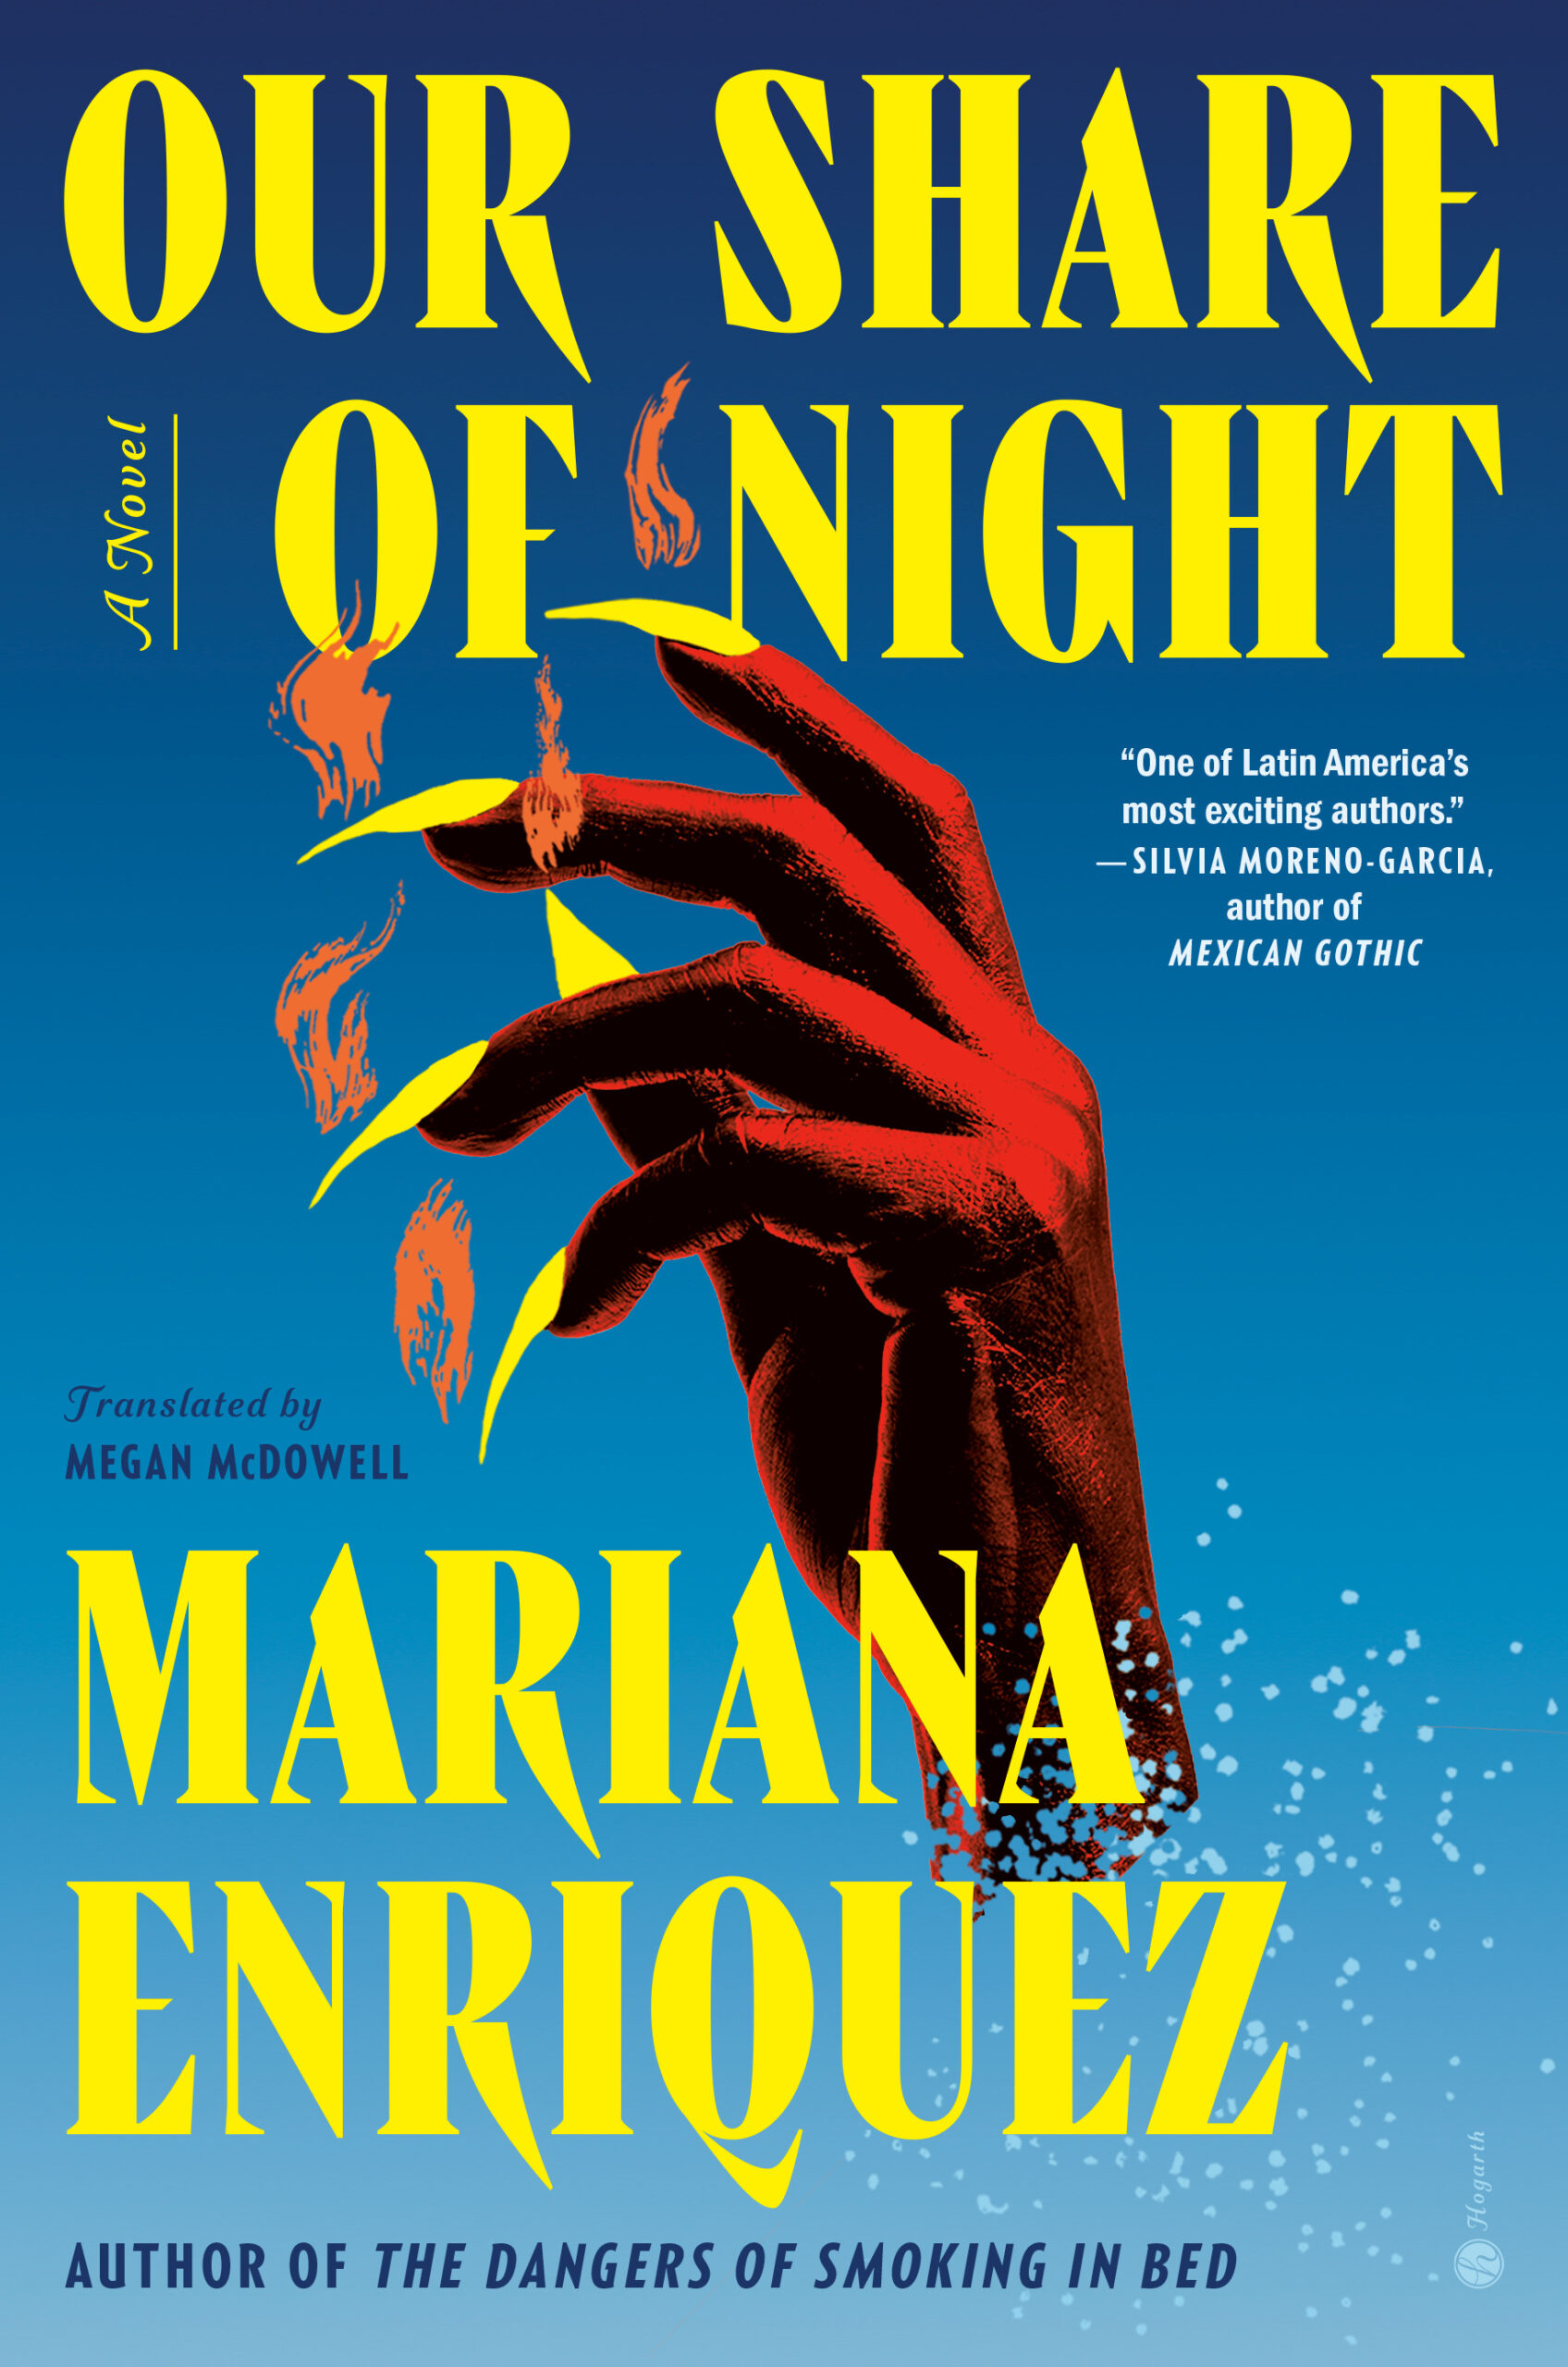 Scribes for the Darkness | An Interview with Mariana Enriquez and Megan McDowell